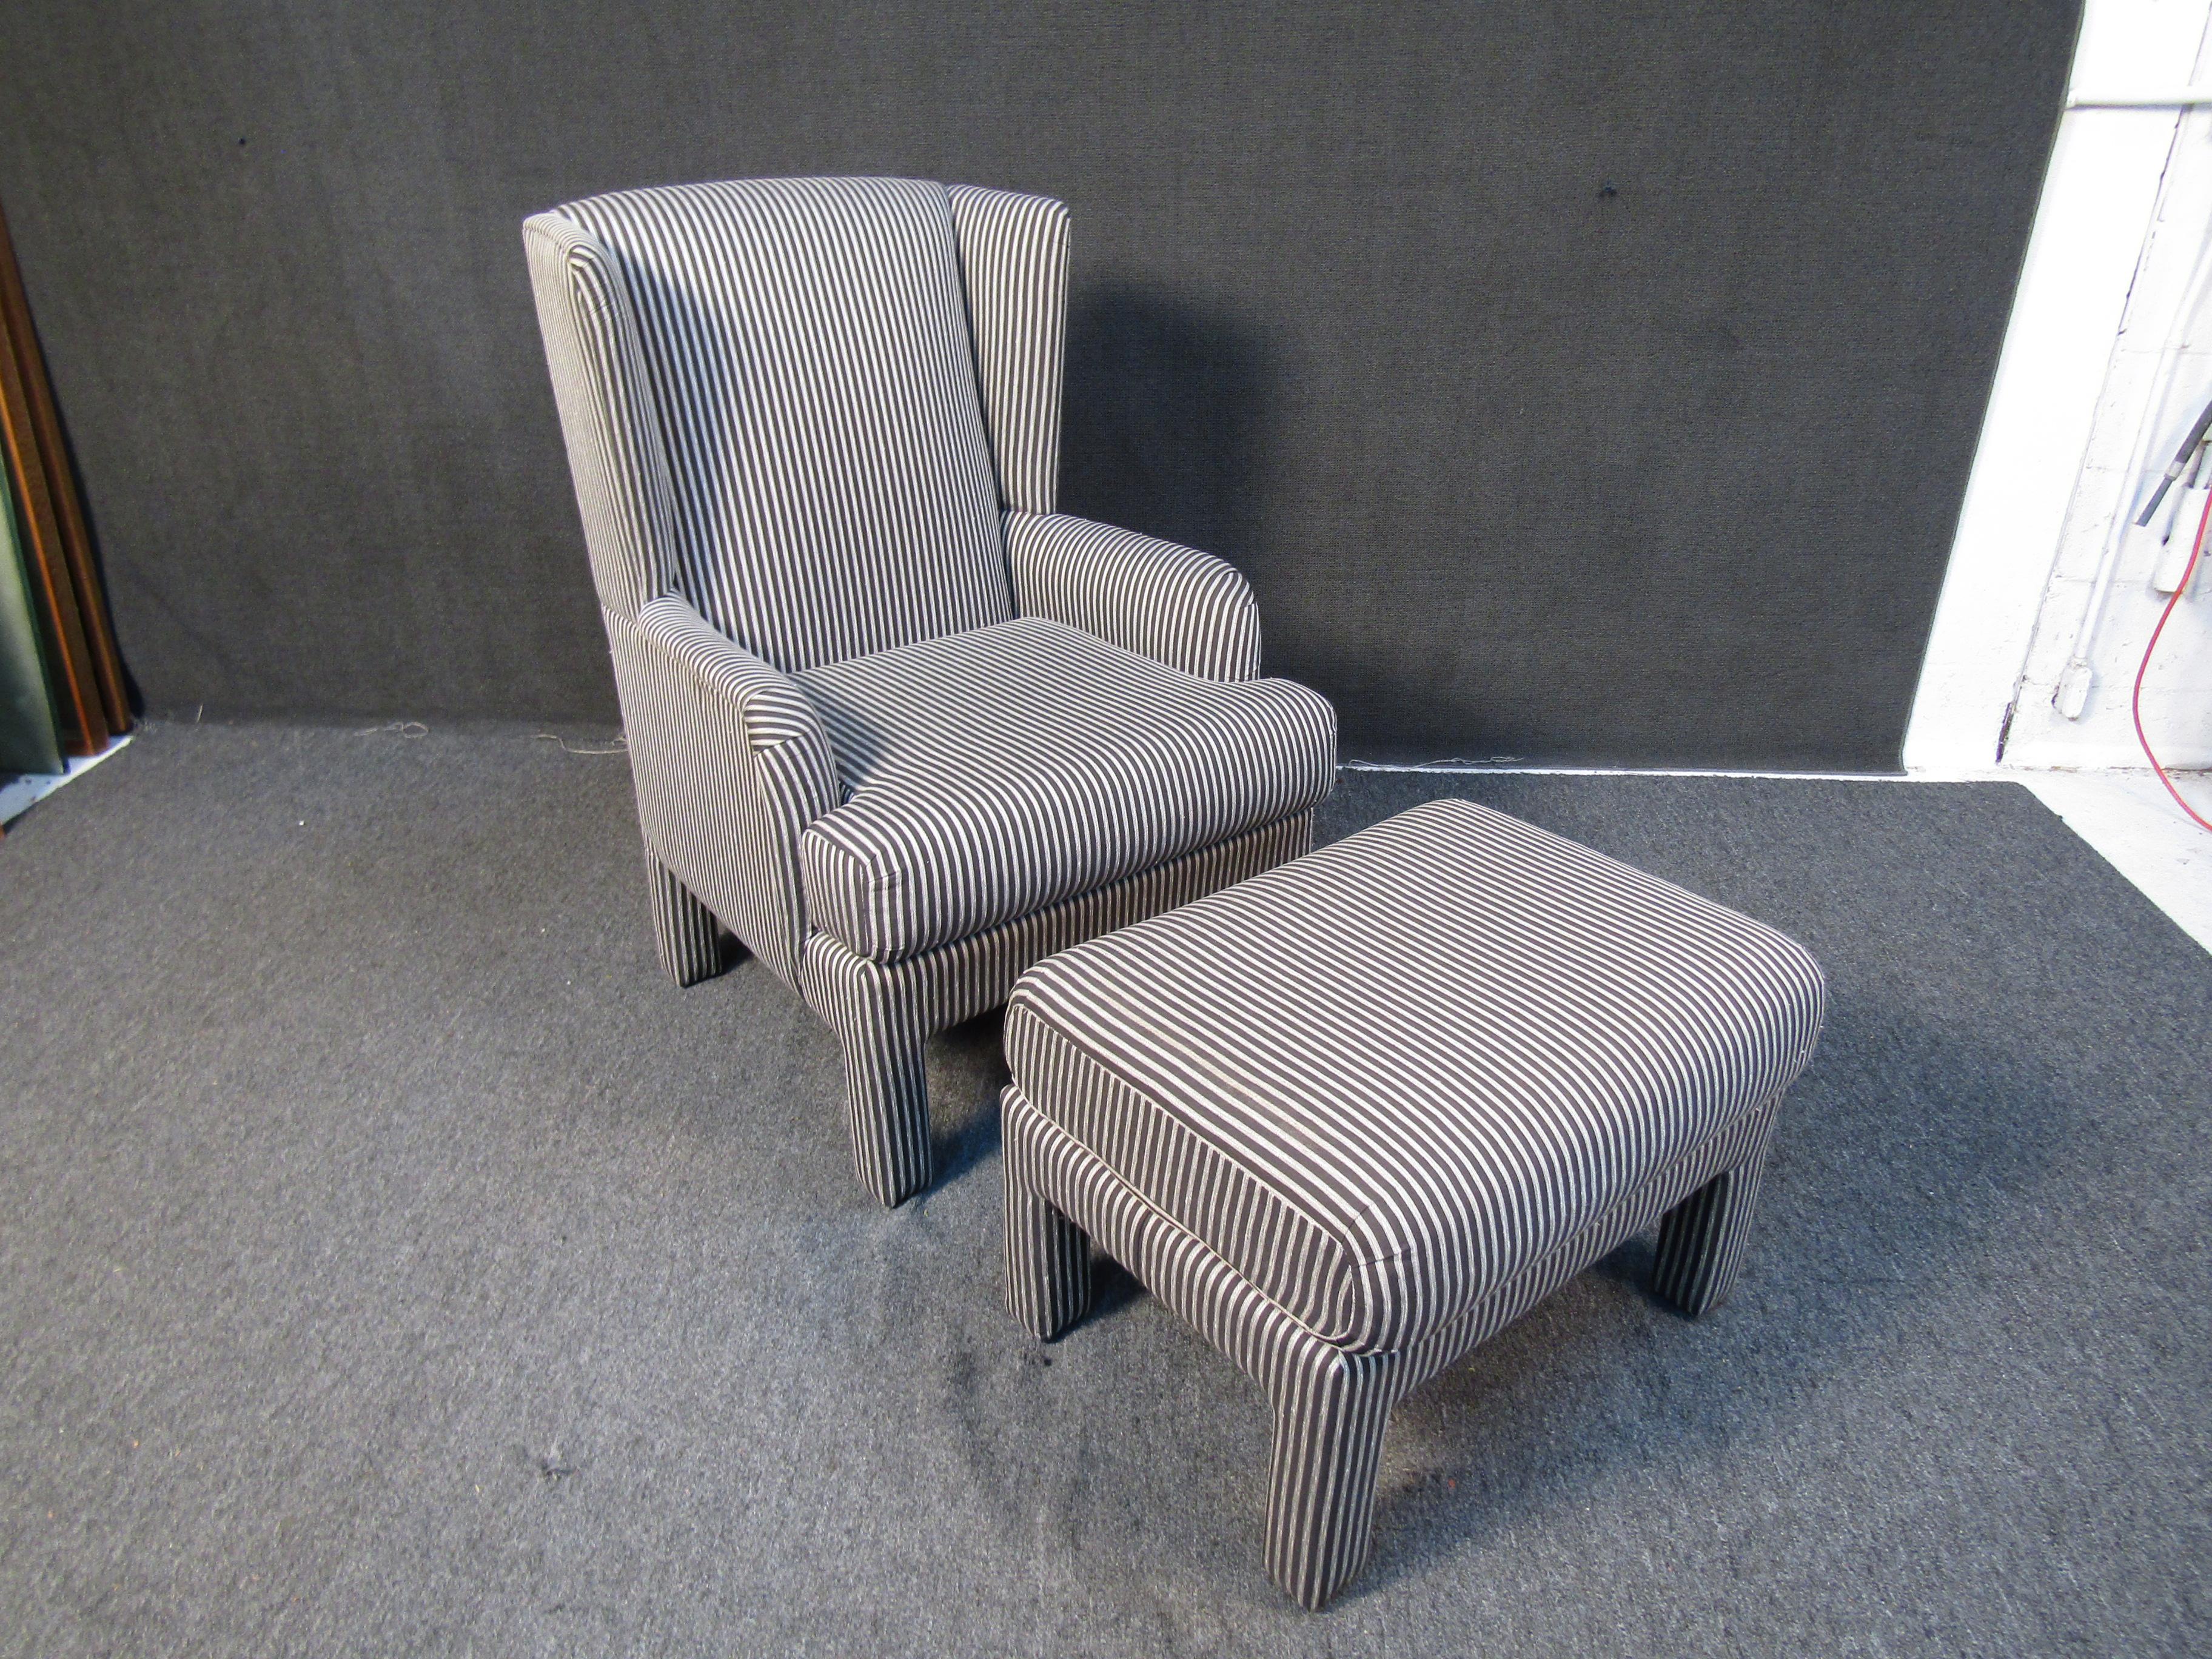 This arm chair and ottoman set features a comfortable cushioned design, with eccentric striped upholstery. Please confirm item location with seller (NY/NJ).